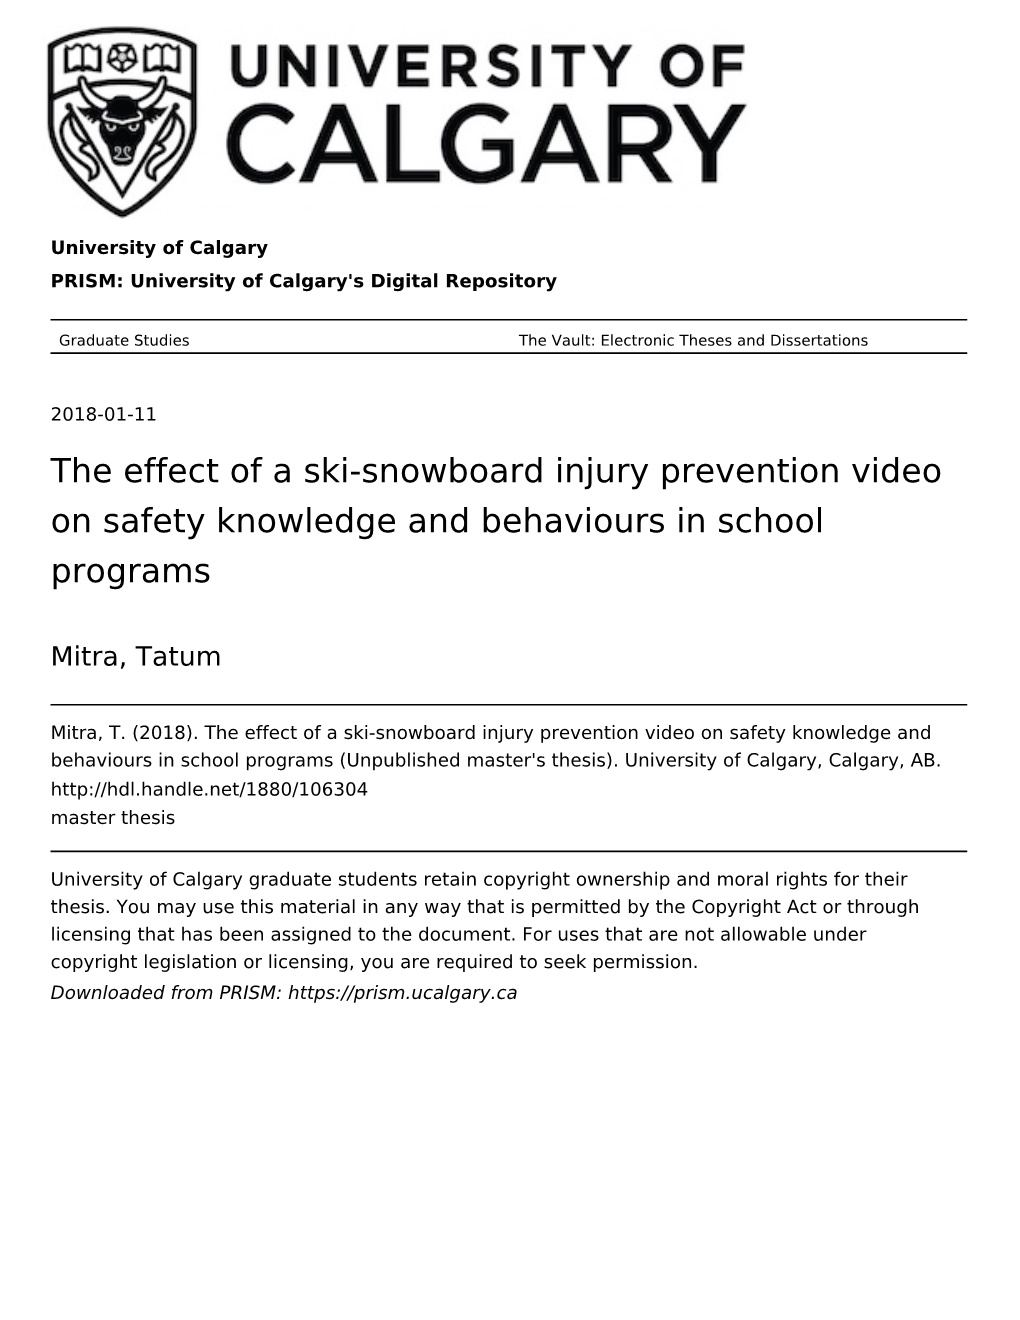 The Effect of a Ski-Snowboard Injury Prevention Video on Safety Knowledge and Behaviours in School Programs